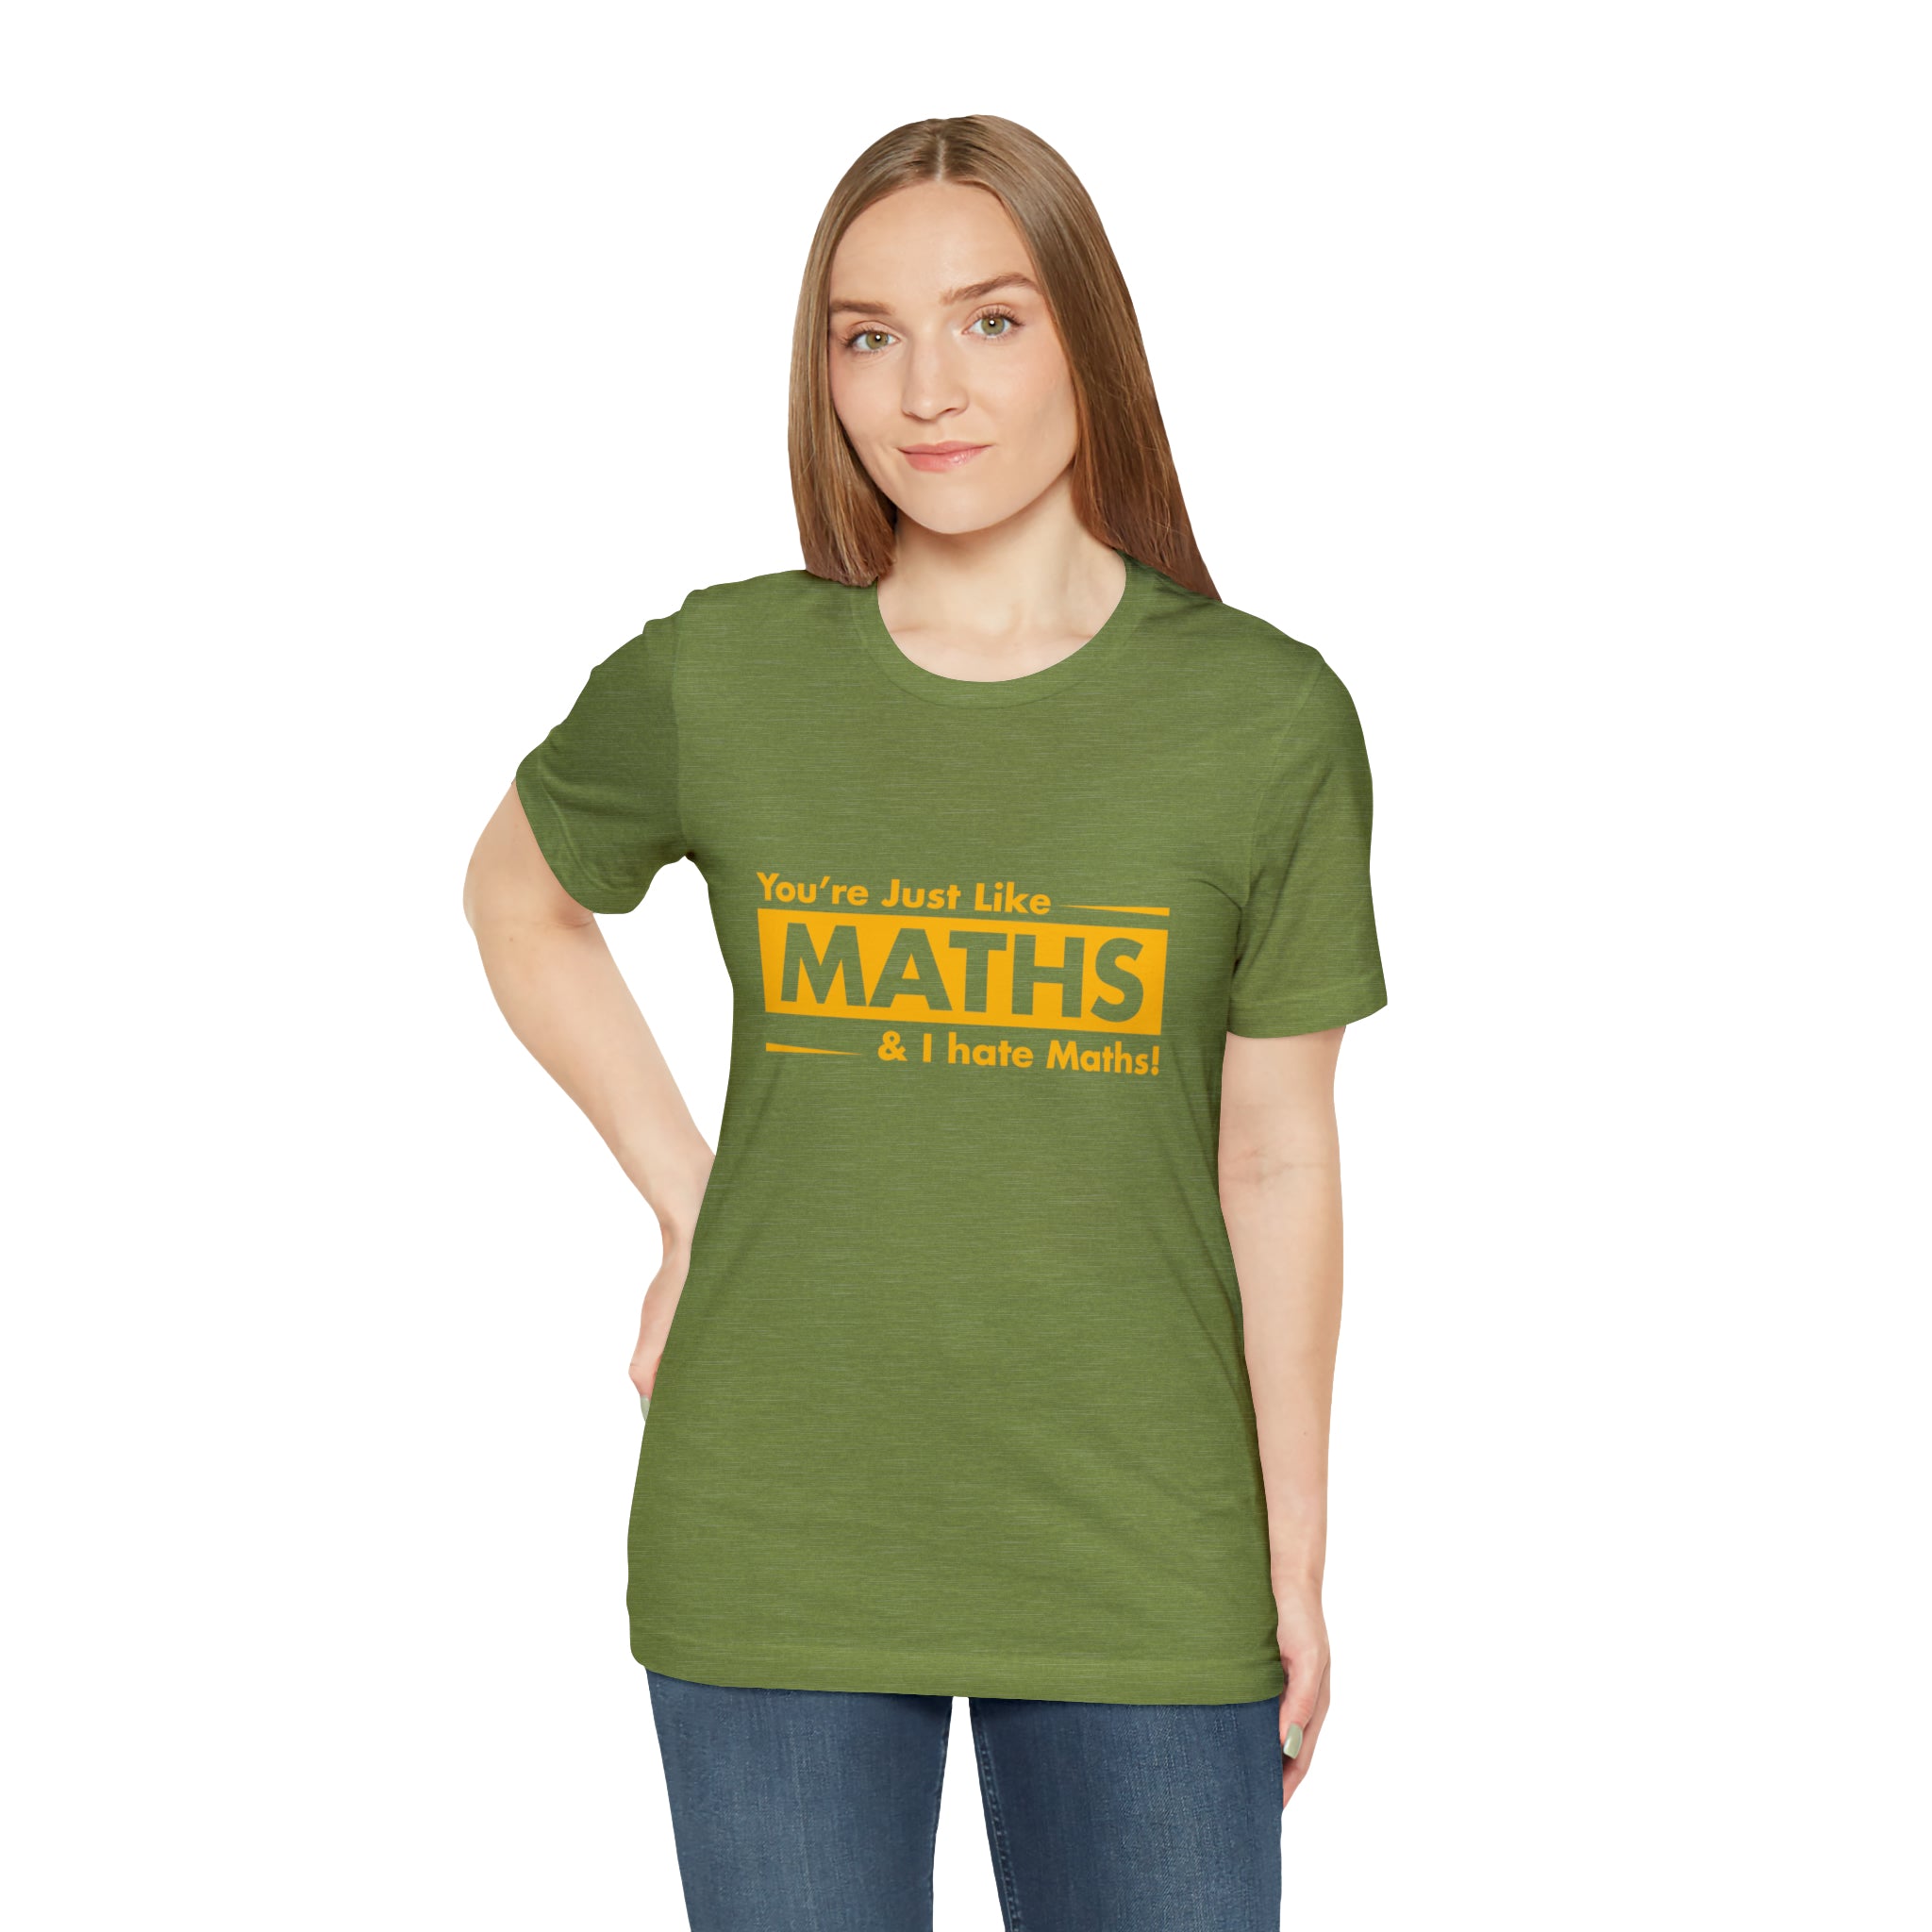 A woman with a great fashion sense is seen wearing a green "You are just like maths and I hate maths" T-shirt.